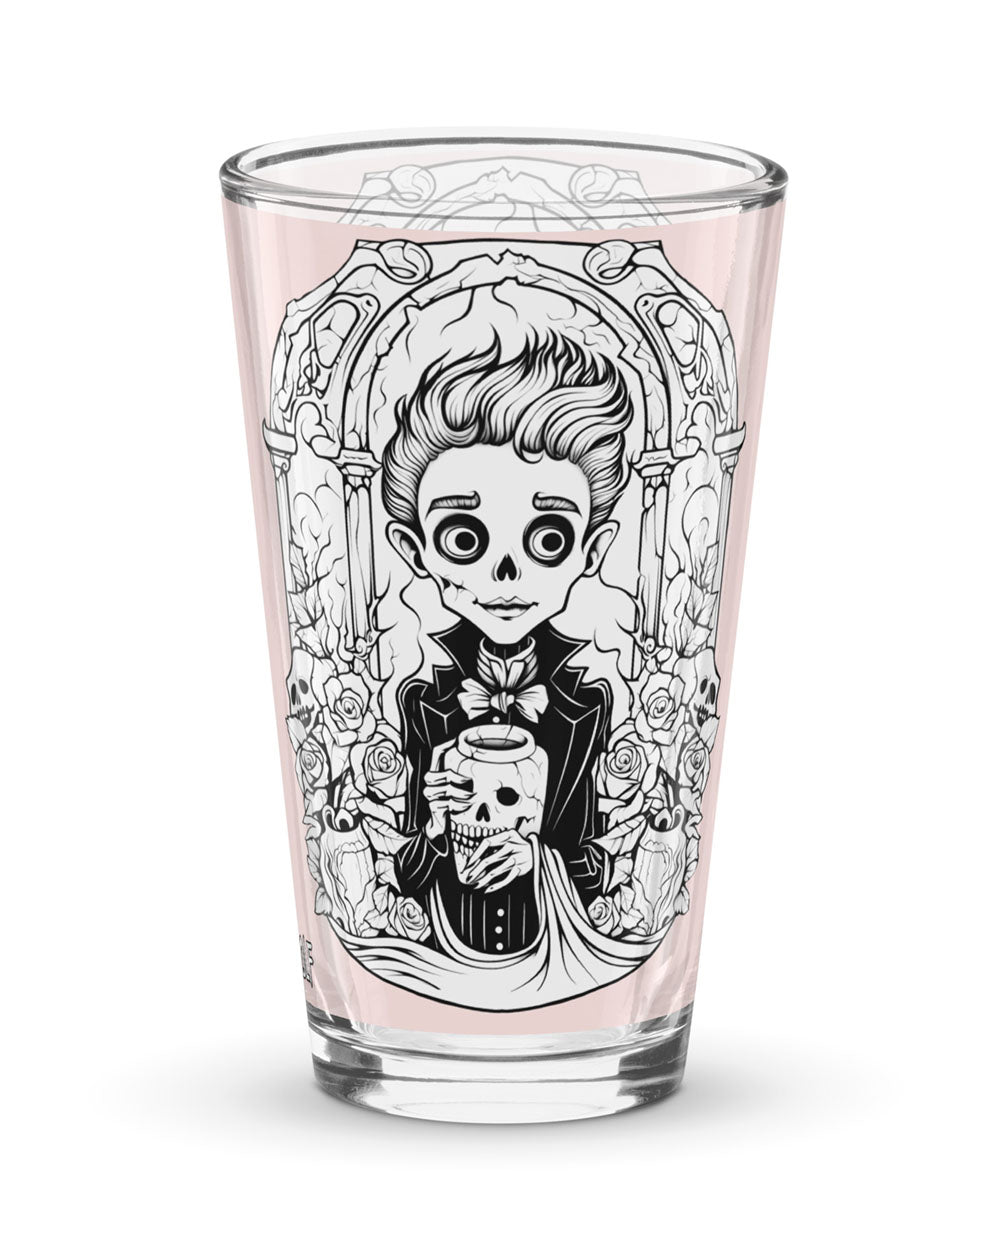 Alfred the DCLXVI Pint Glass - Witchy Home Decor Gothic Shaker Grunge Aesthetic Halloween Gifts